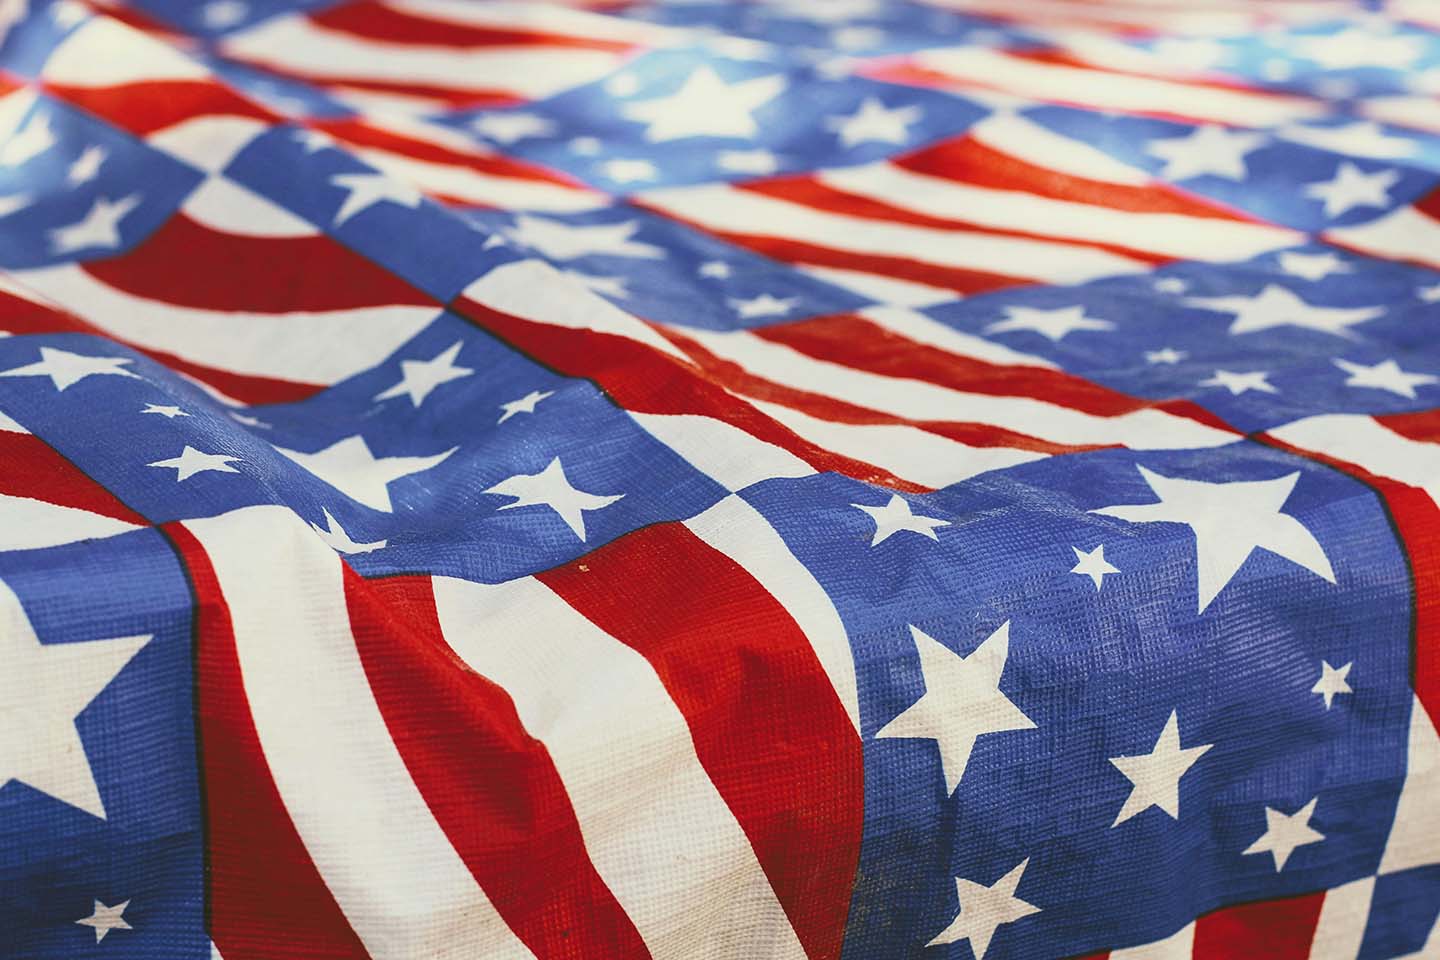 An American flag tablecloth with eight white stars instead of fifty.